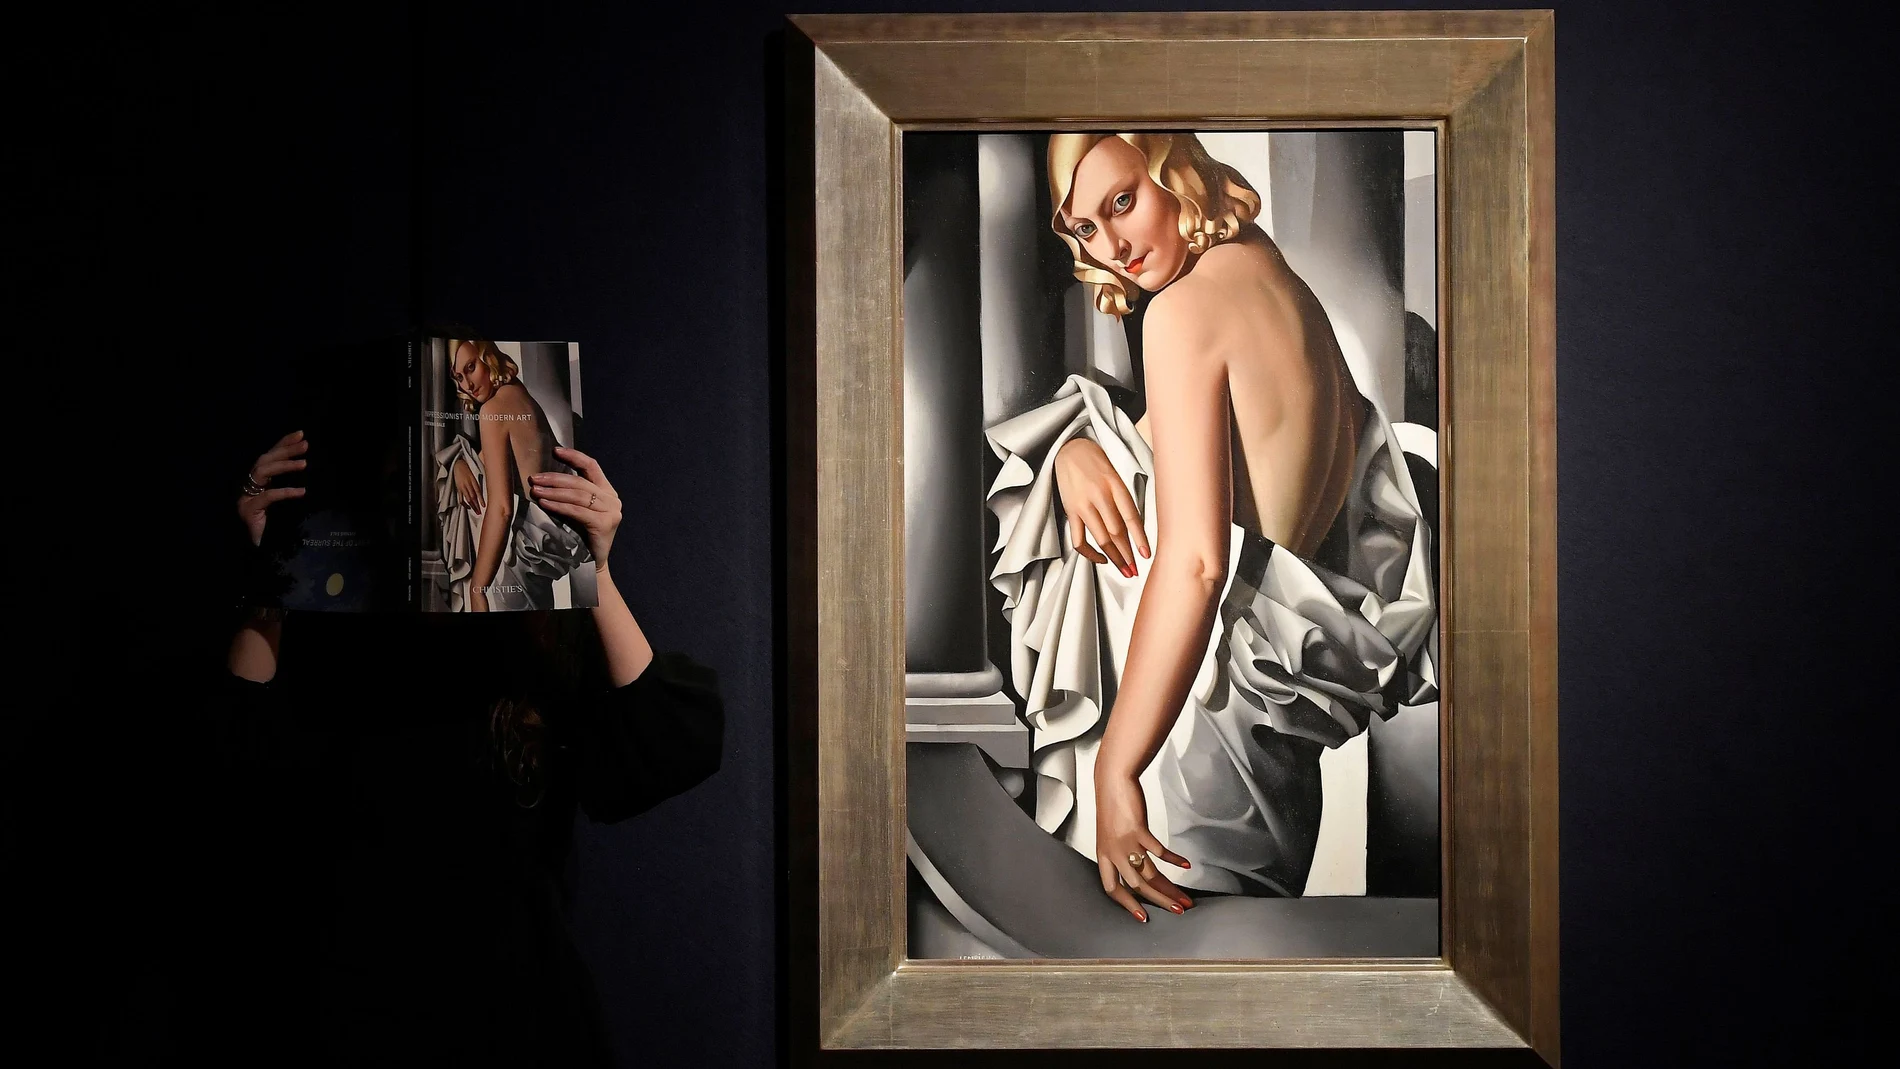 An employee poses as she views a sales catalogue next to 'Portrait de Marjorie Ferry' by Tamara de Lempecka ahead of Impressionist, Modernist and Surreal sales at Christie's auction house, London, Britain, January 30, 2020. REUTERS/Toby Melville NO RESALES. NO ARCHIVES.